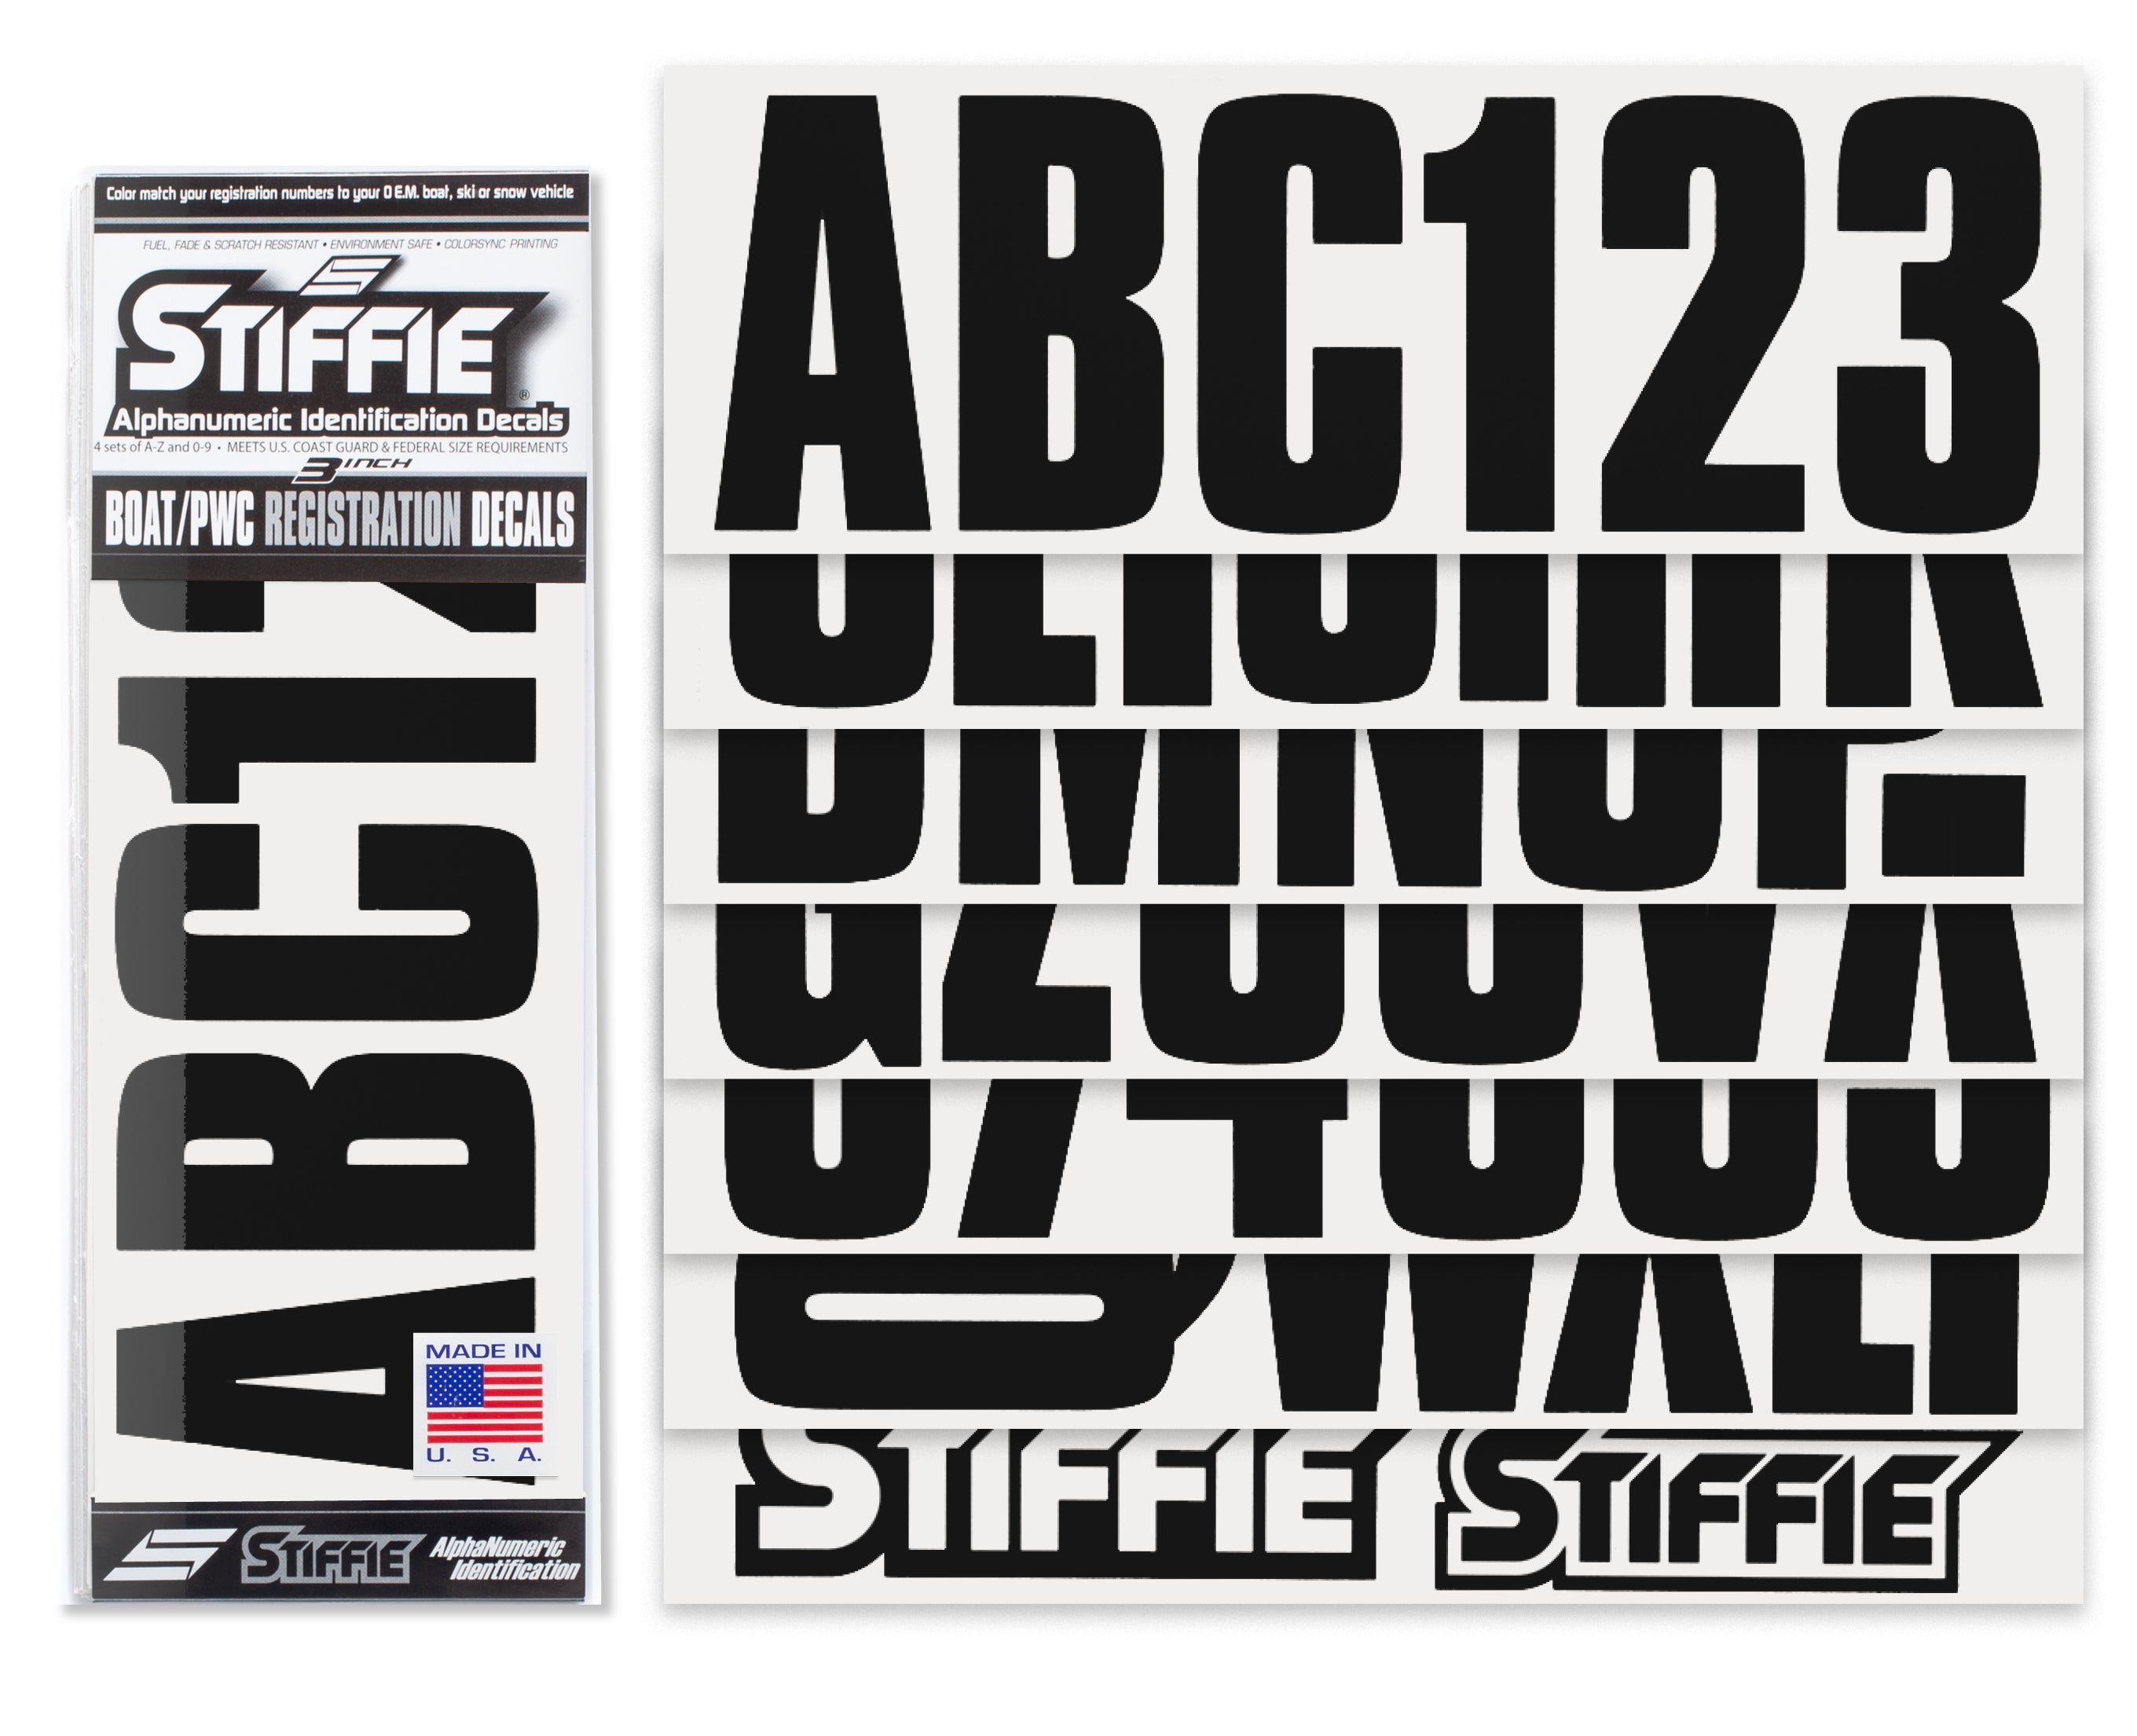 STIFFIE Uniline Black 3" ID Kit Alpha-Numeric Registration Identification Numbers Stickers Decals for Boats & Personal Watercraft